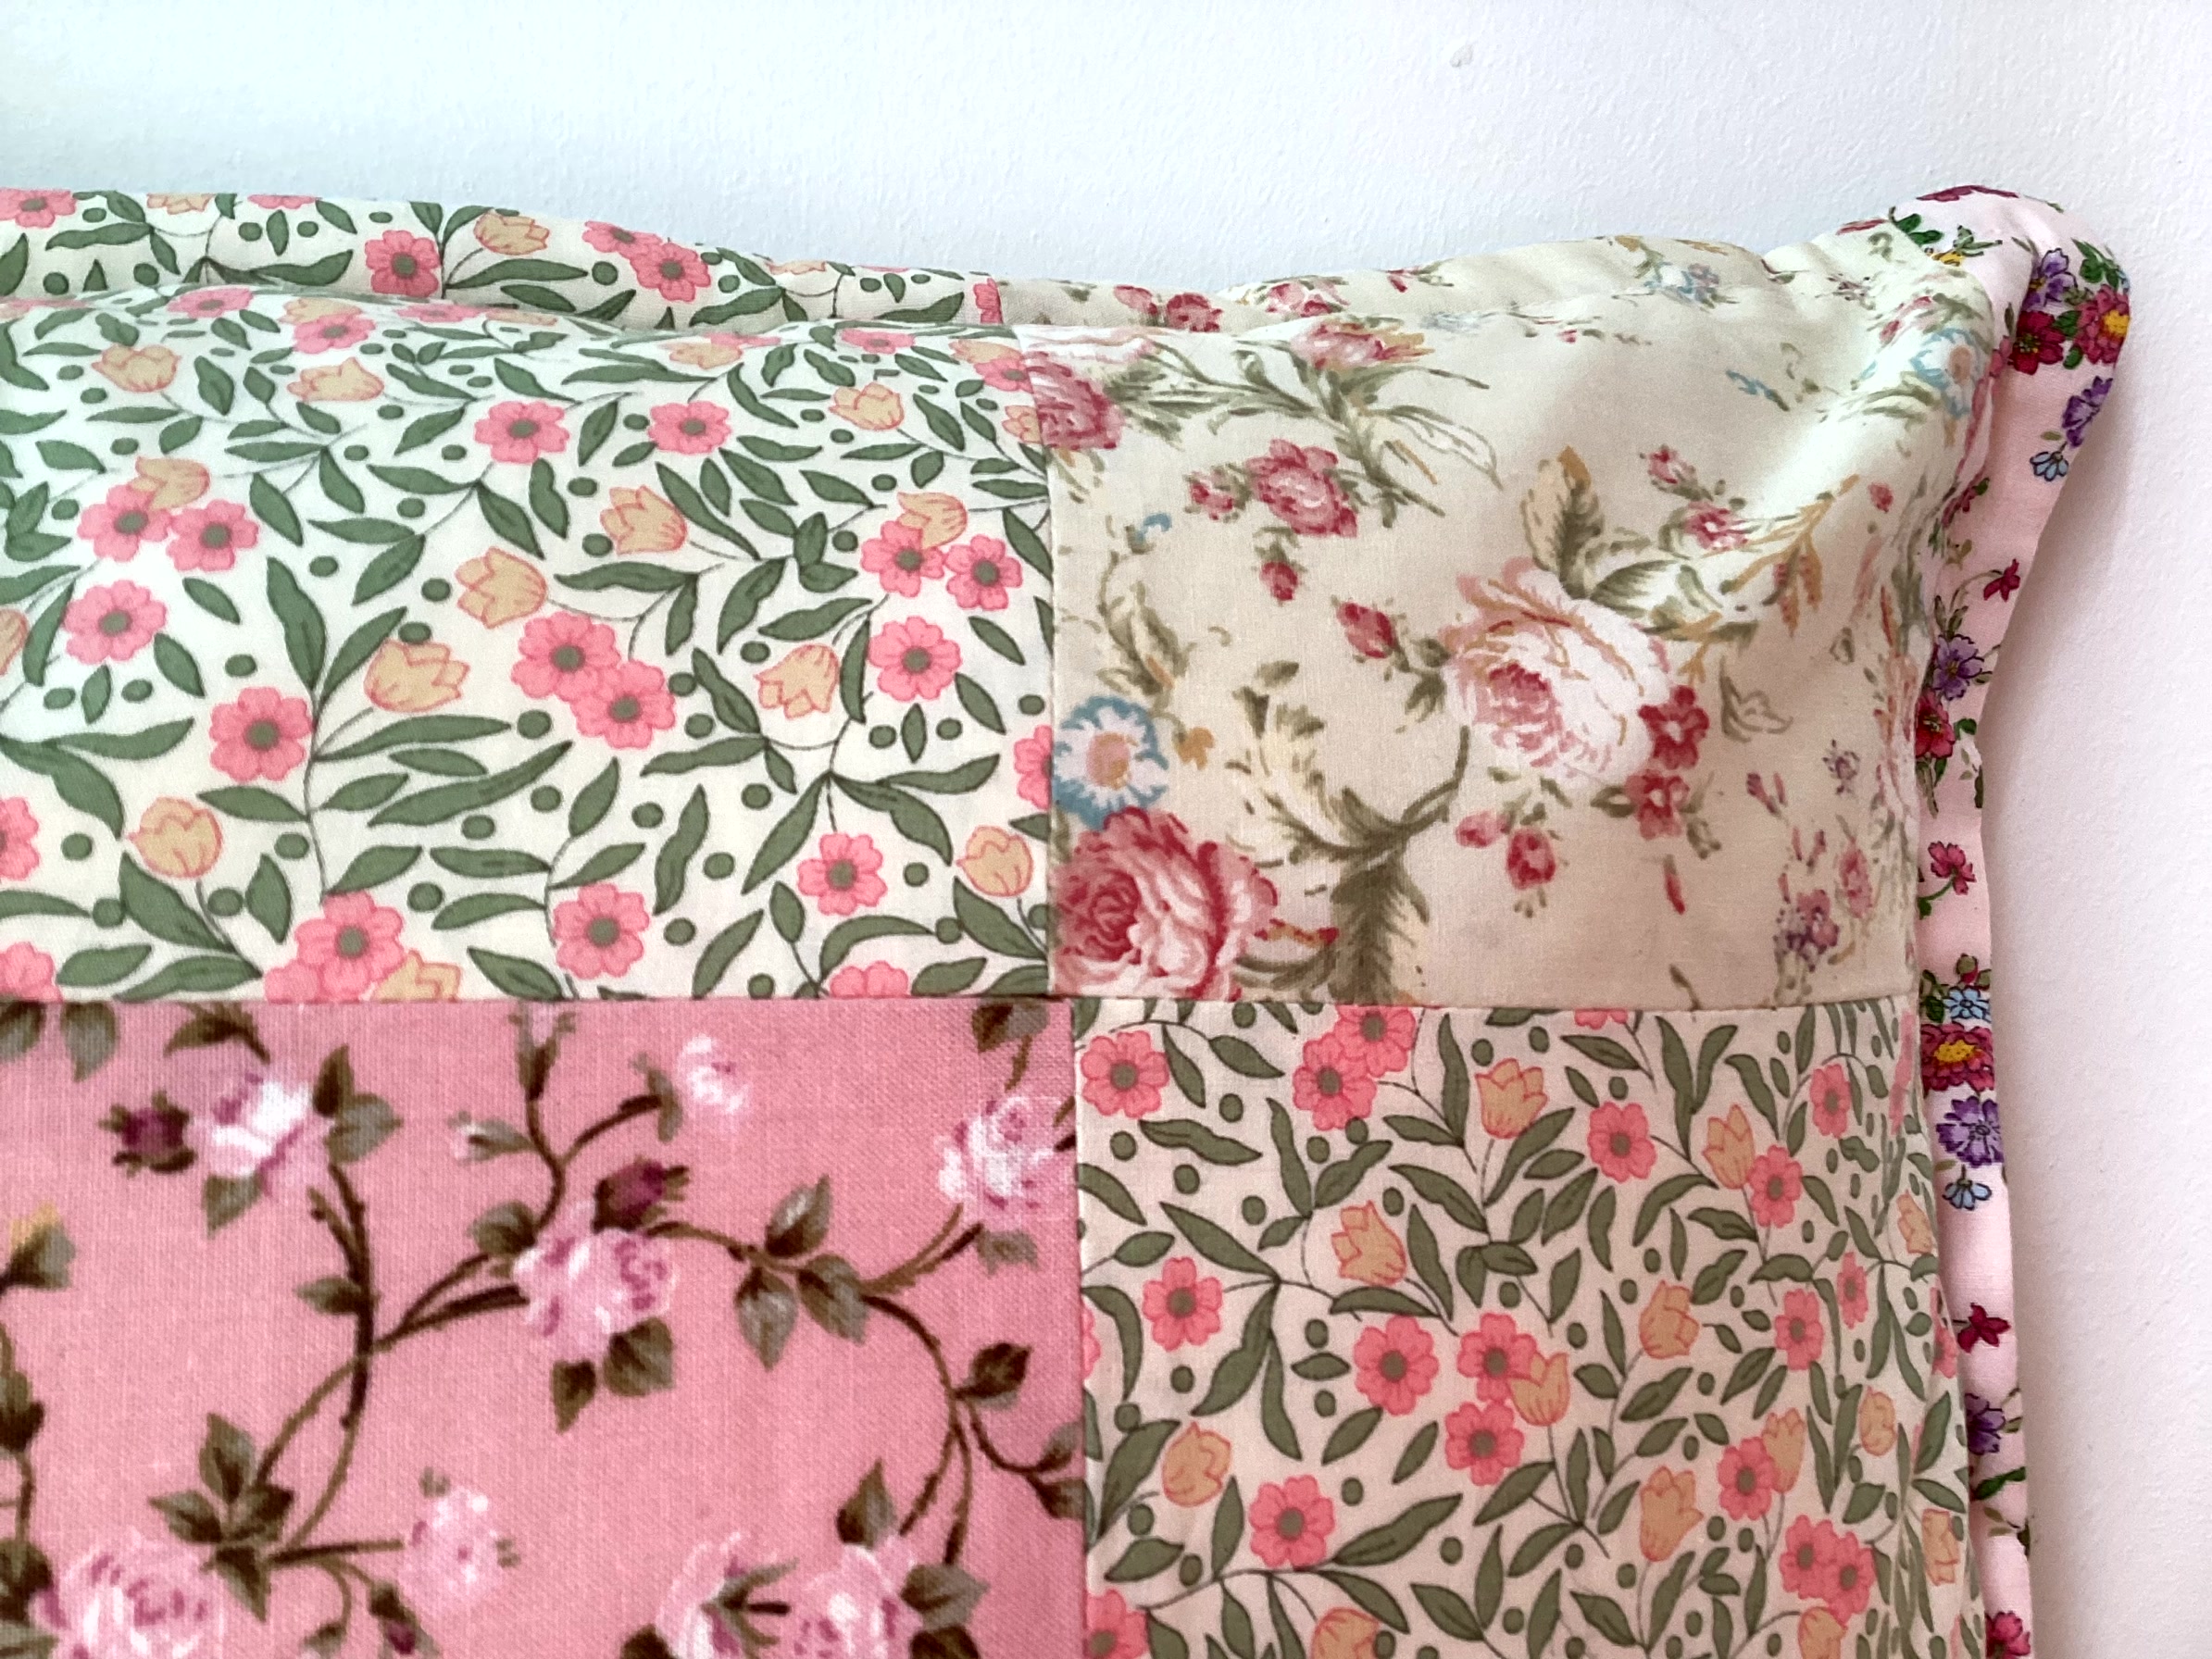 Cushion - patchwork of cream and pink